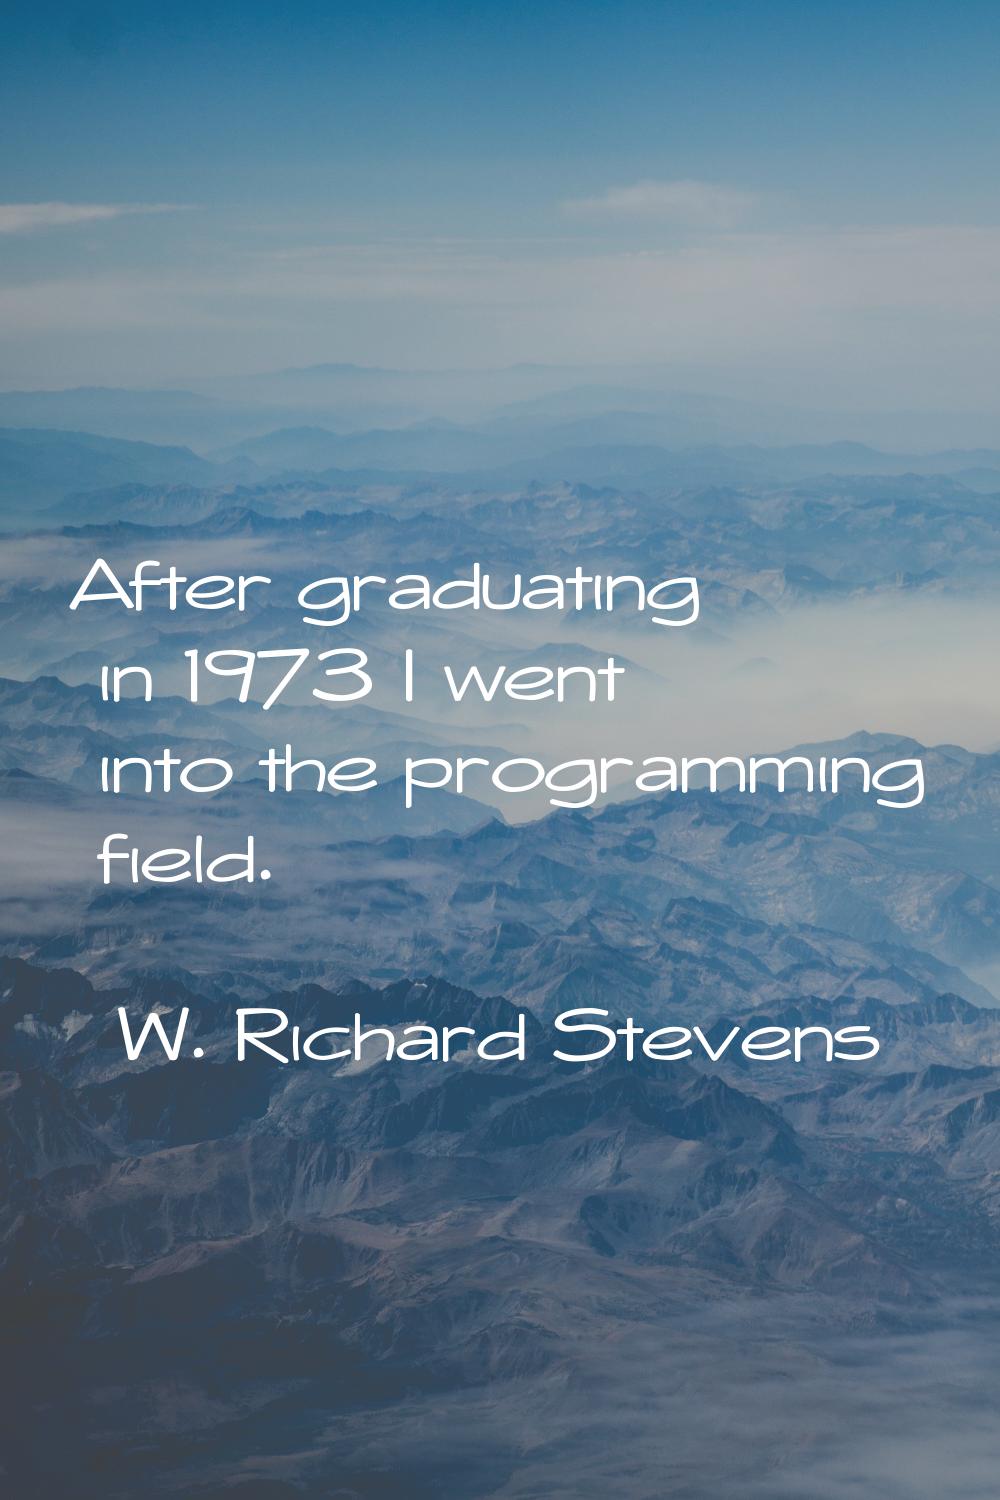 After graduating in 1973 I went into the programming field.